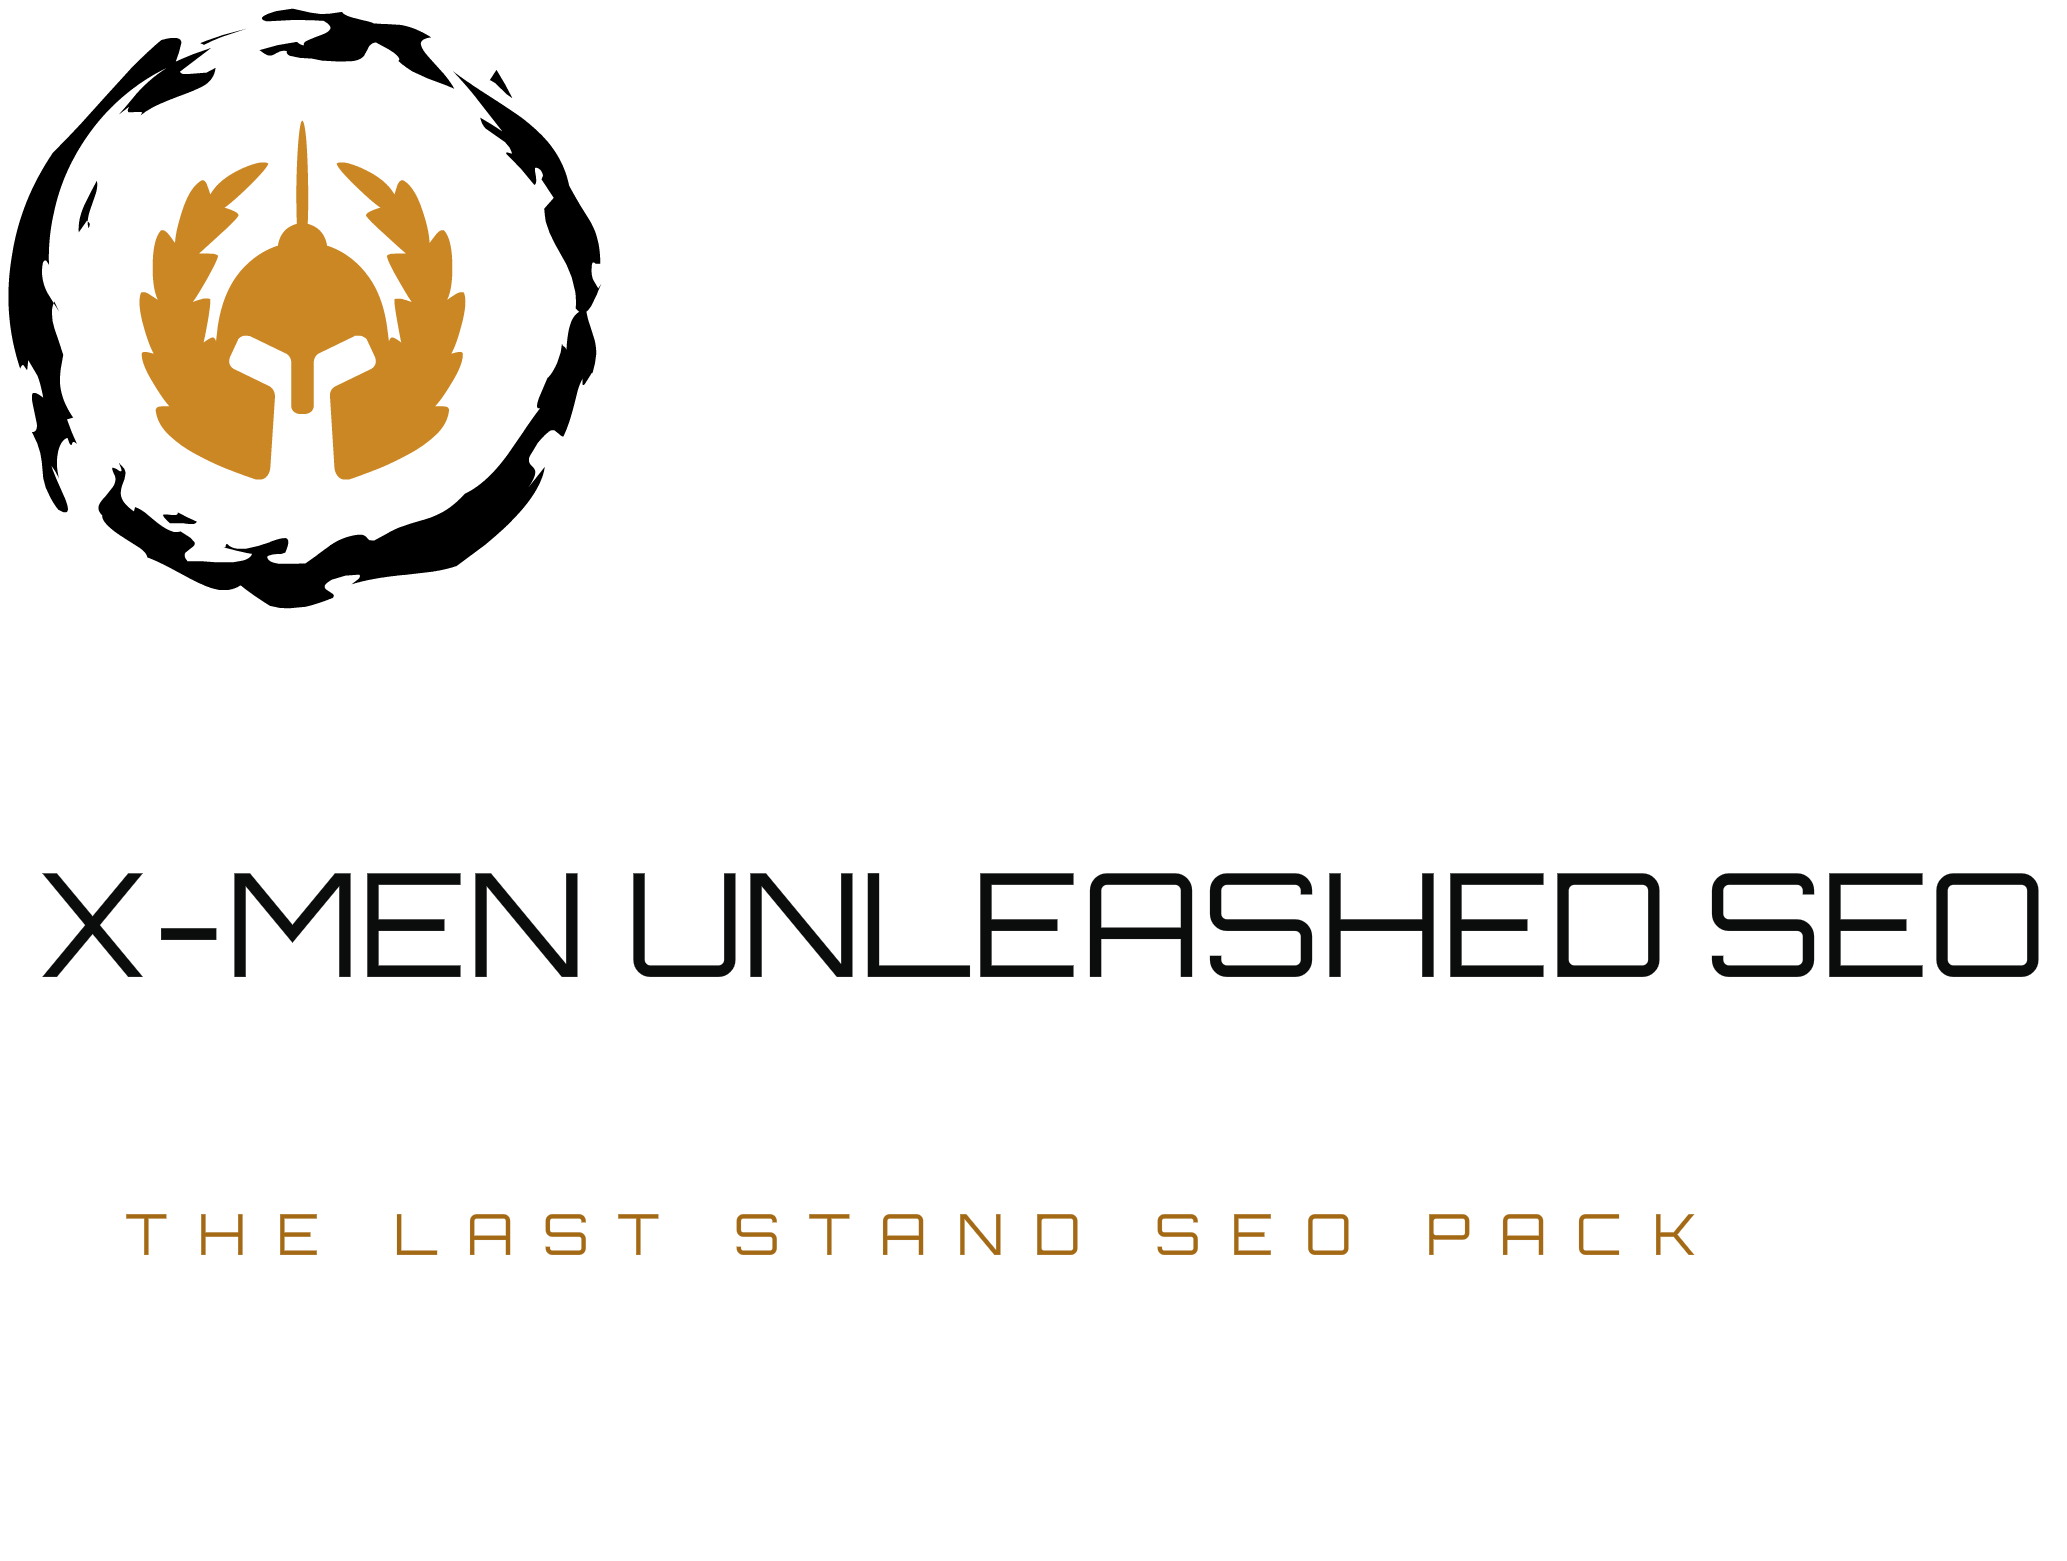 THE LAST STAND SEO PACK